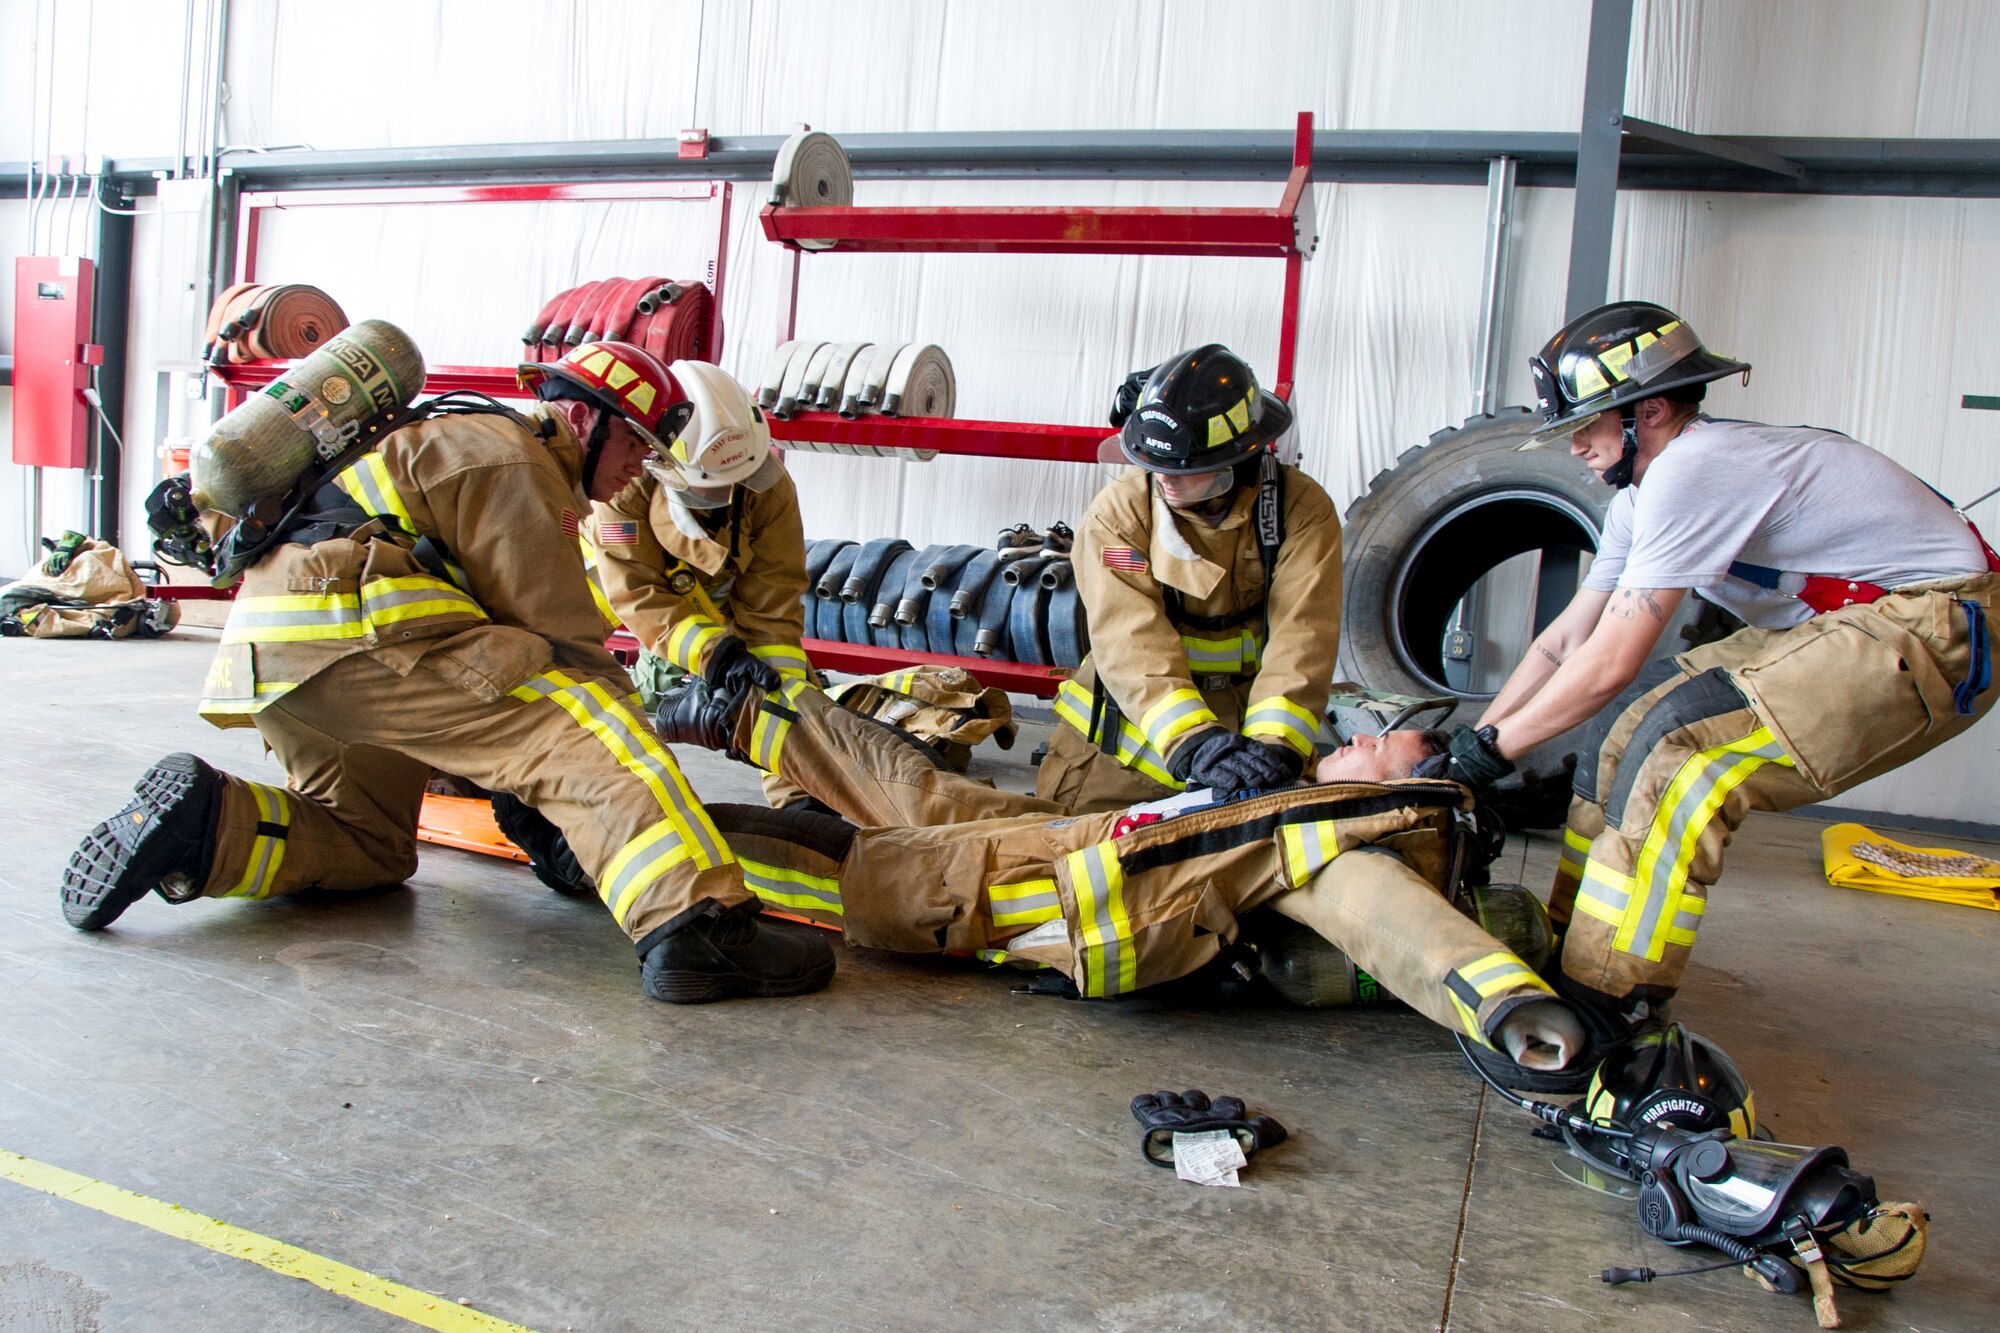 Firefighters remove firefighting gear and simulate CPR on U.S. Air Force Staff Sgt. Joshua Hayworth, of Waianae, Hawaii, as he acts out a cardiac arrest incident during a training scenario for the first-ever Air Force Reserve Command Firefighter Rescue and Survival Course at Dobbins Air Reserve Base, Ga., April 18, 2017. Twenty Citizen Airmen participated in the intense 50-hour course held at the 622nd Civil Engineer Group expeditionary combat support-training certification center, which focused on a Rapid Intervention Crew, or RIC. The RIC is a dedicated and specially trained group of firefighters whose responsibilities include safely evacuating a distressed firefighter from a structure. (U.S. Air Force photo by Master Sgt. Theanne K. Herrmann)